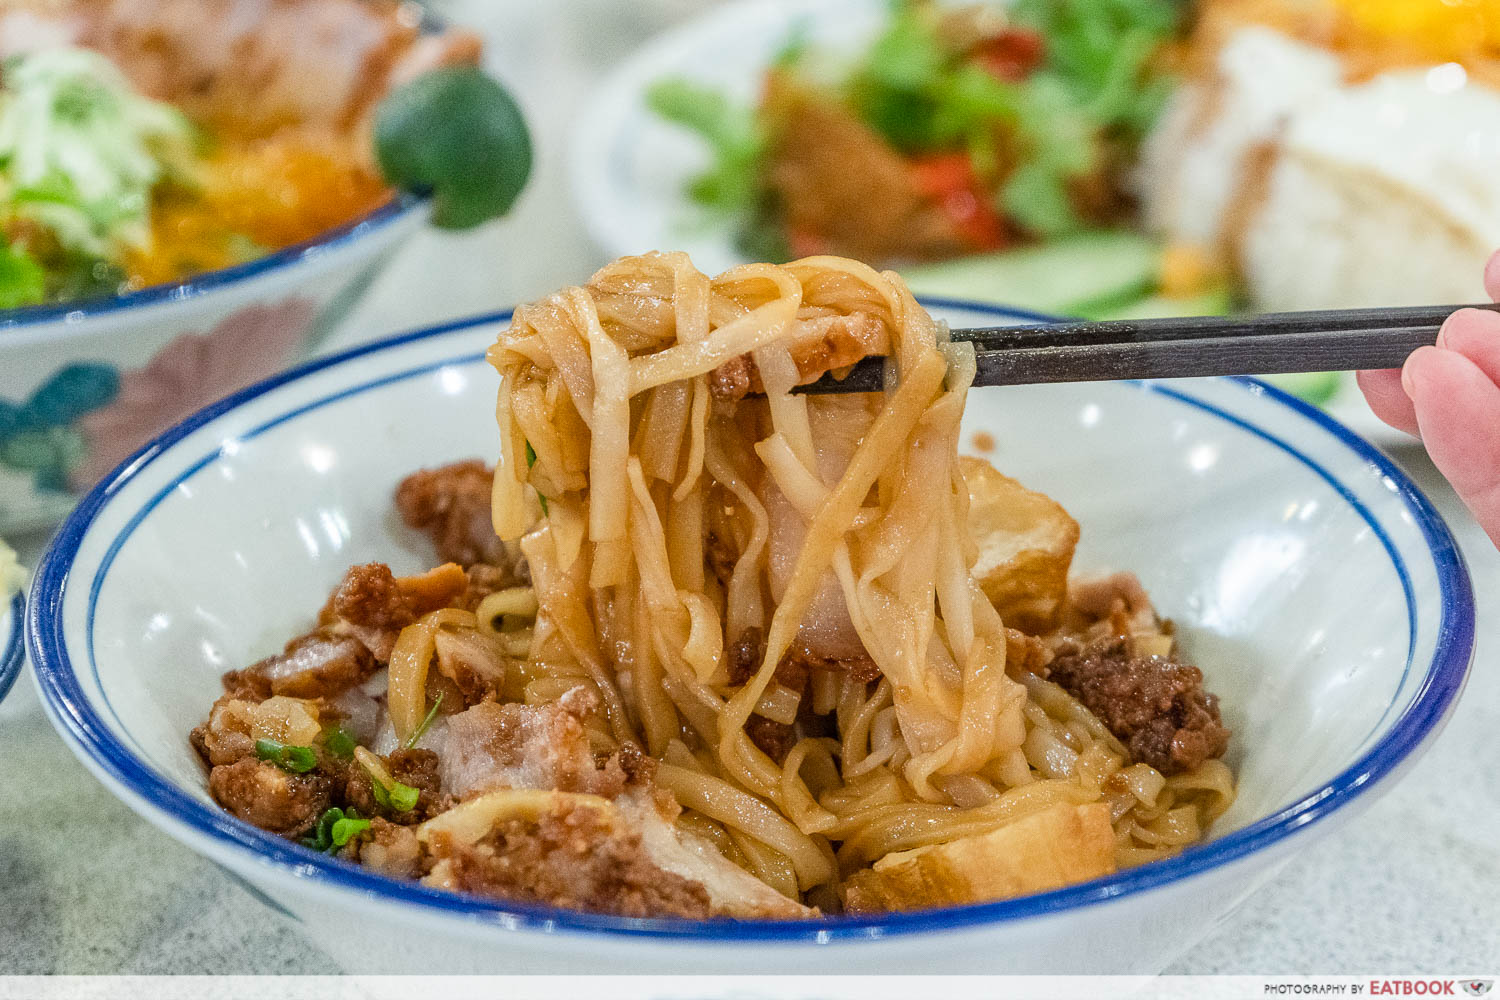 Traditional fried pork Ah Yen - kway teow